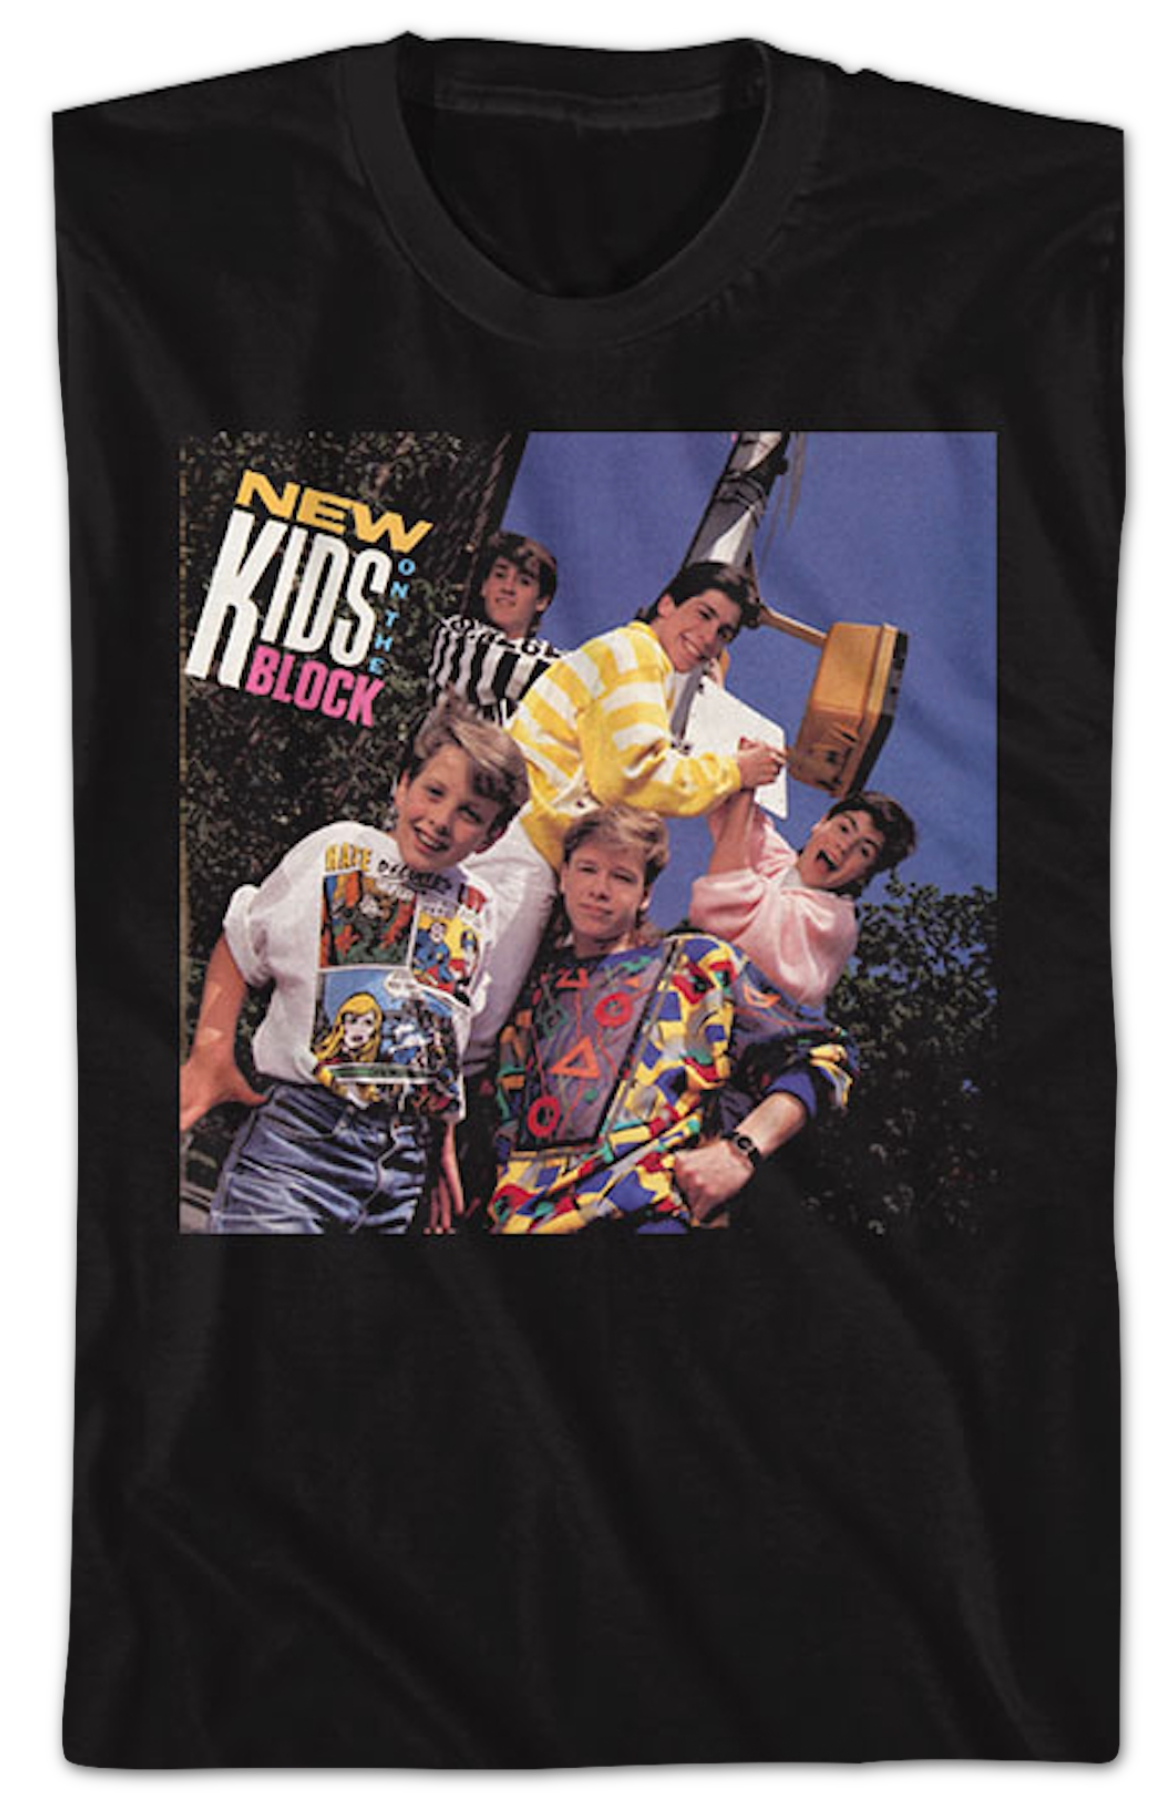 Front & Back Debut Album New Kids On The Block T-Shirt